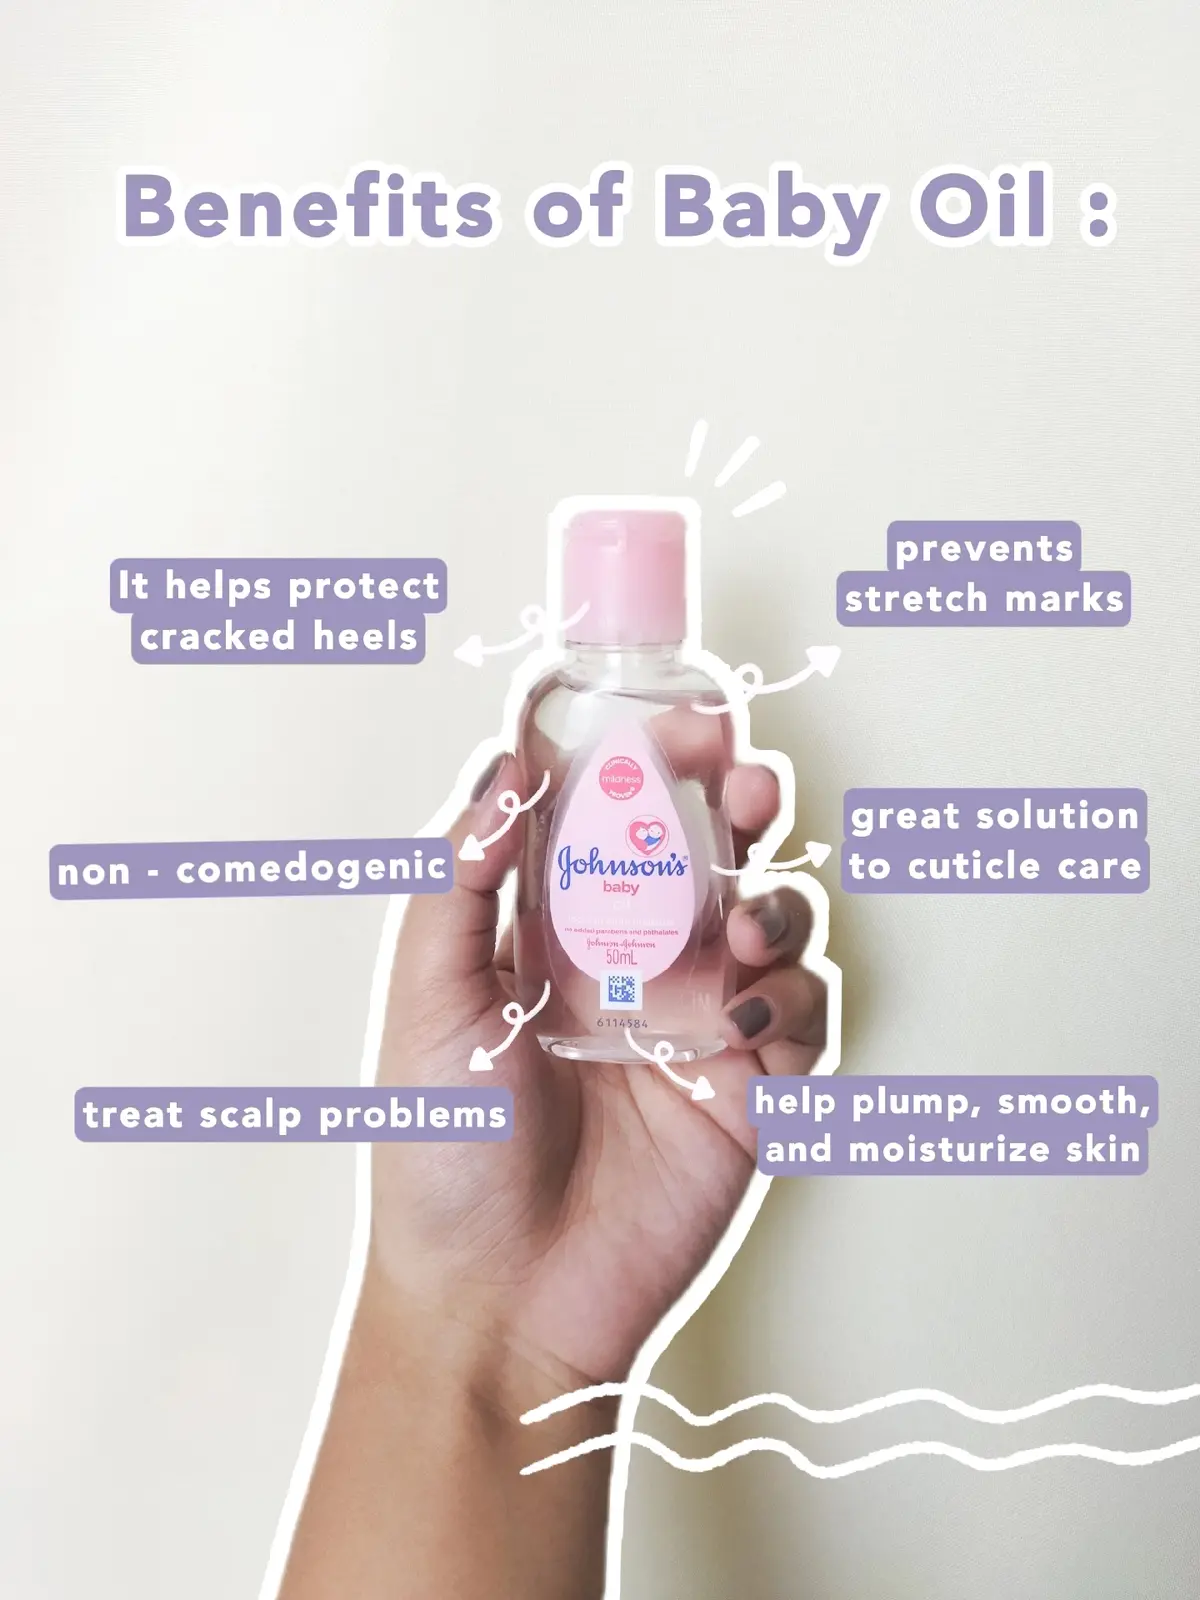 Baby Oil for Hair: 8 Benefits, Risks, and More